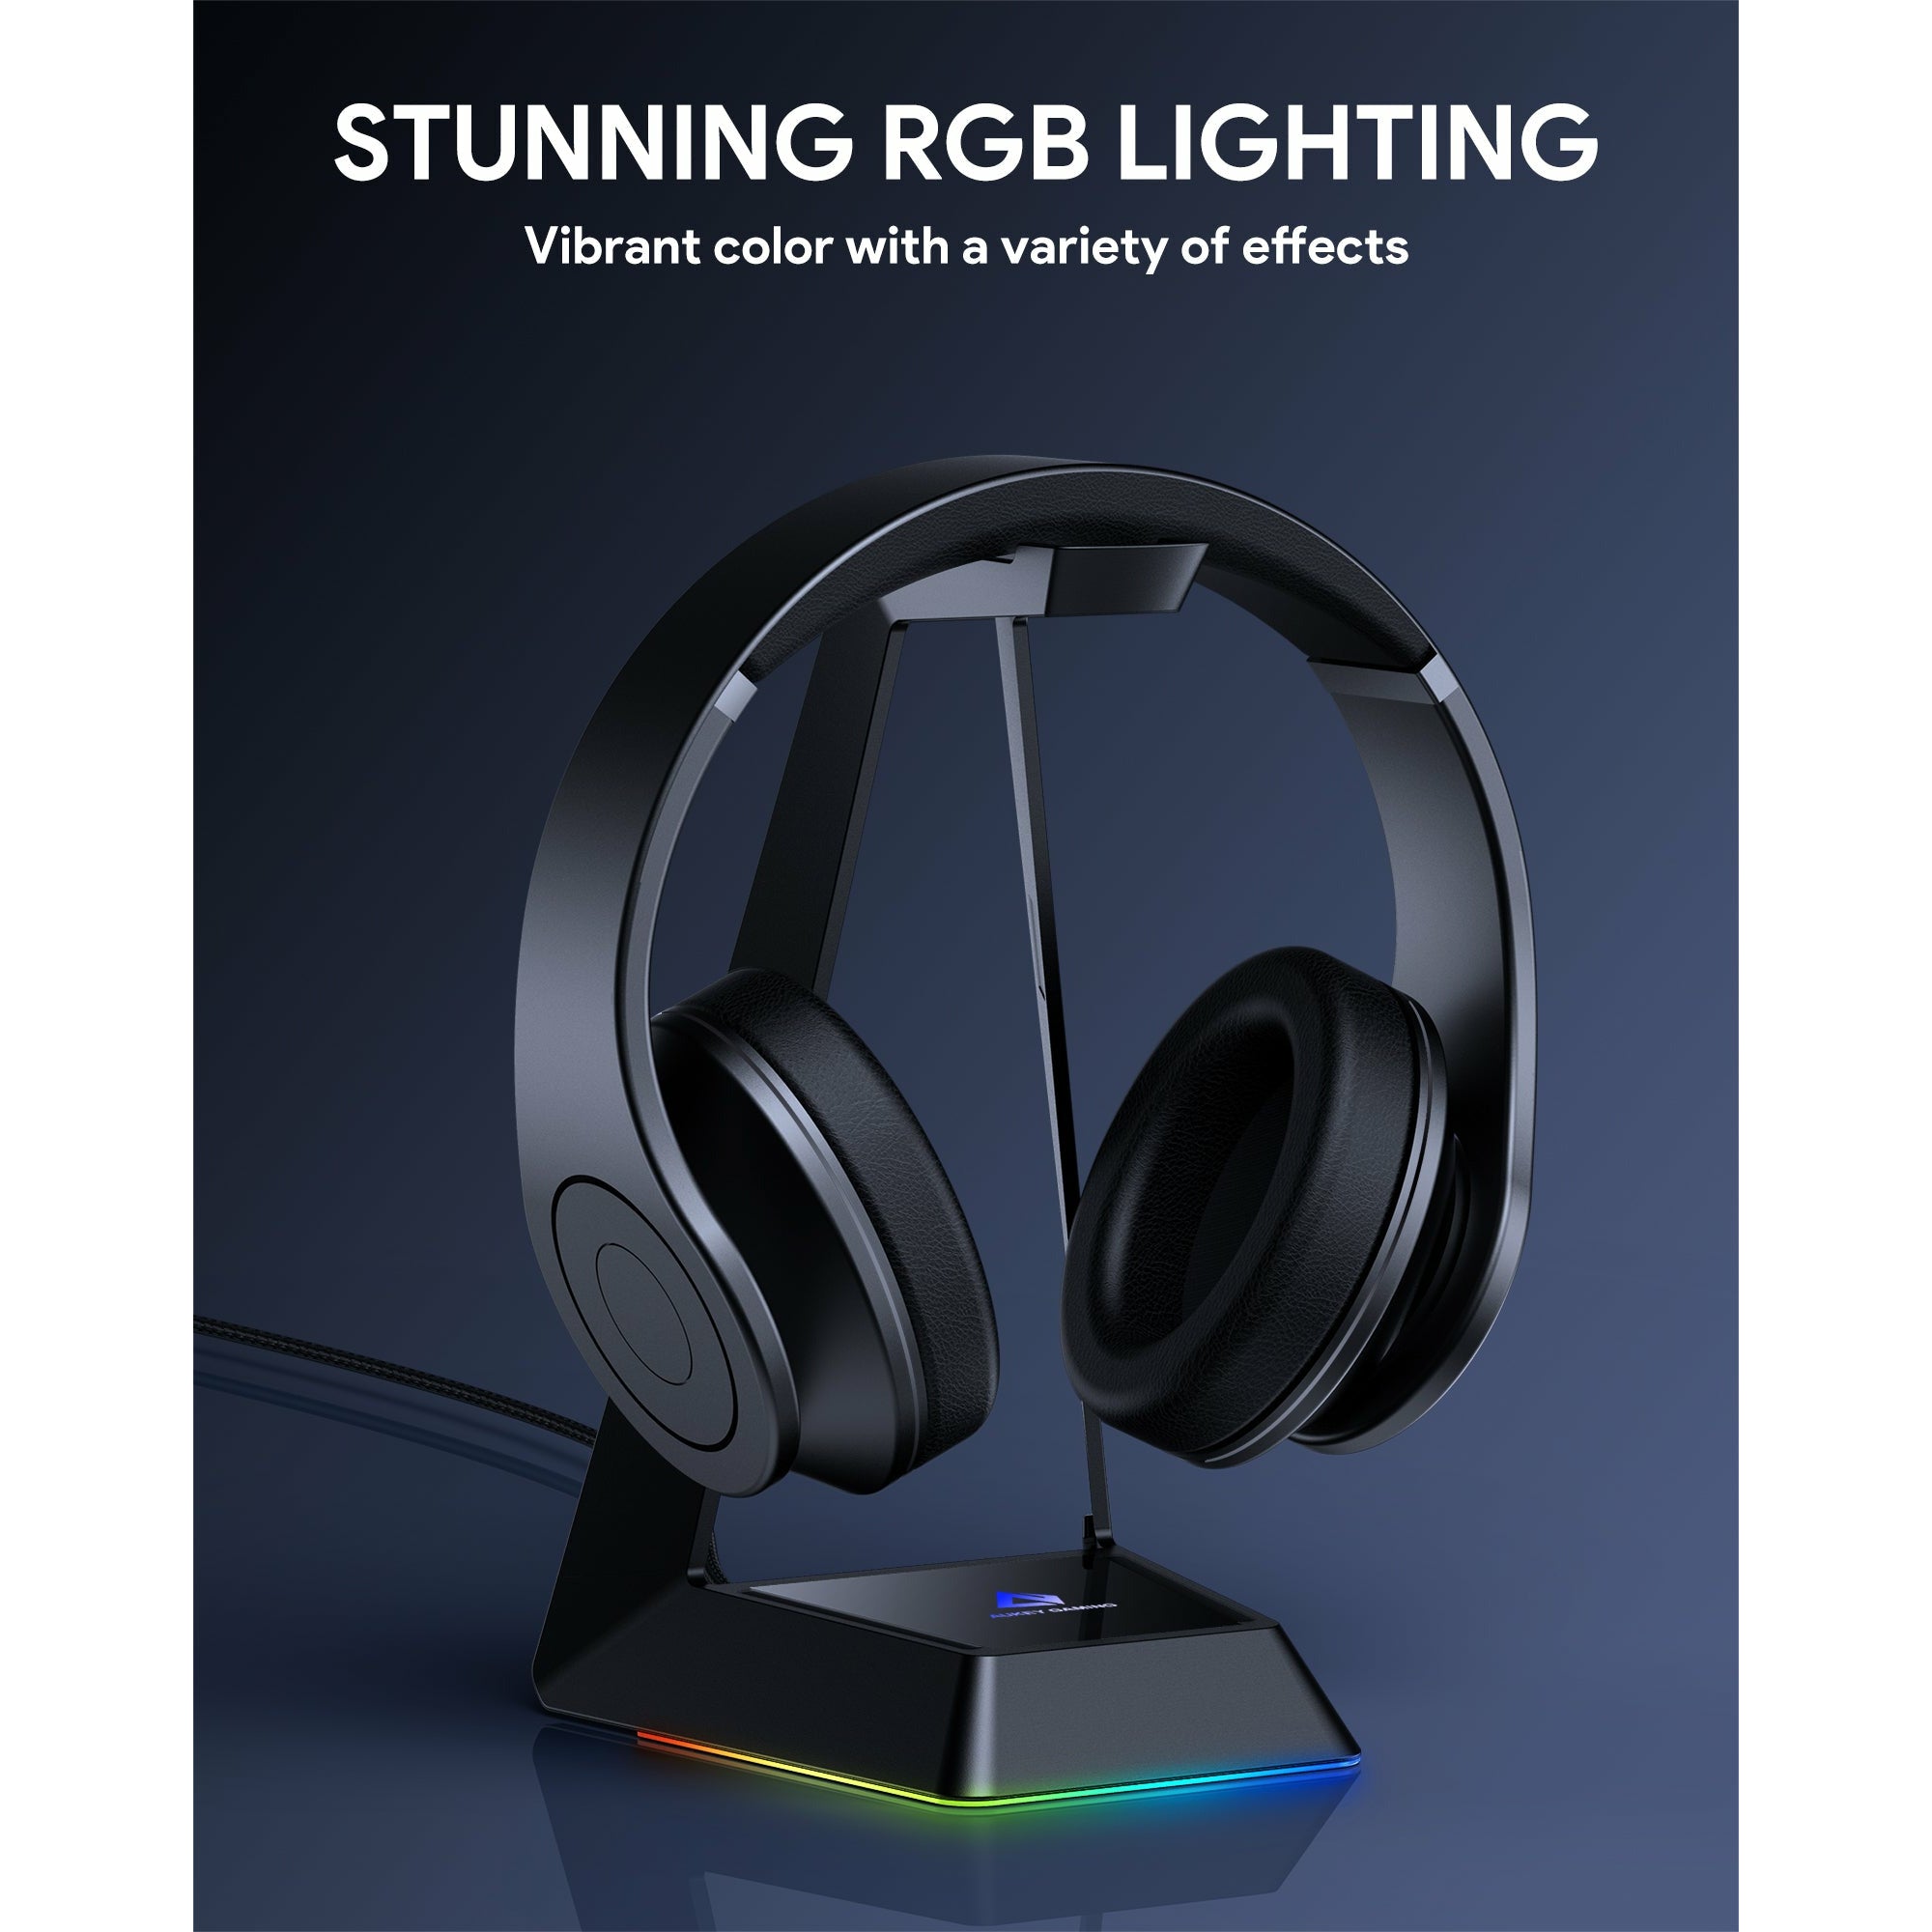 AUKEY GHS8 RGB Headphone Stand with 3 USB Ports 8 Lighting Effects